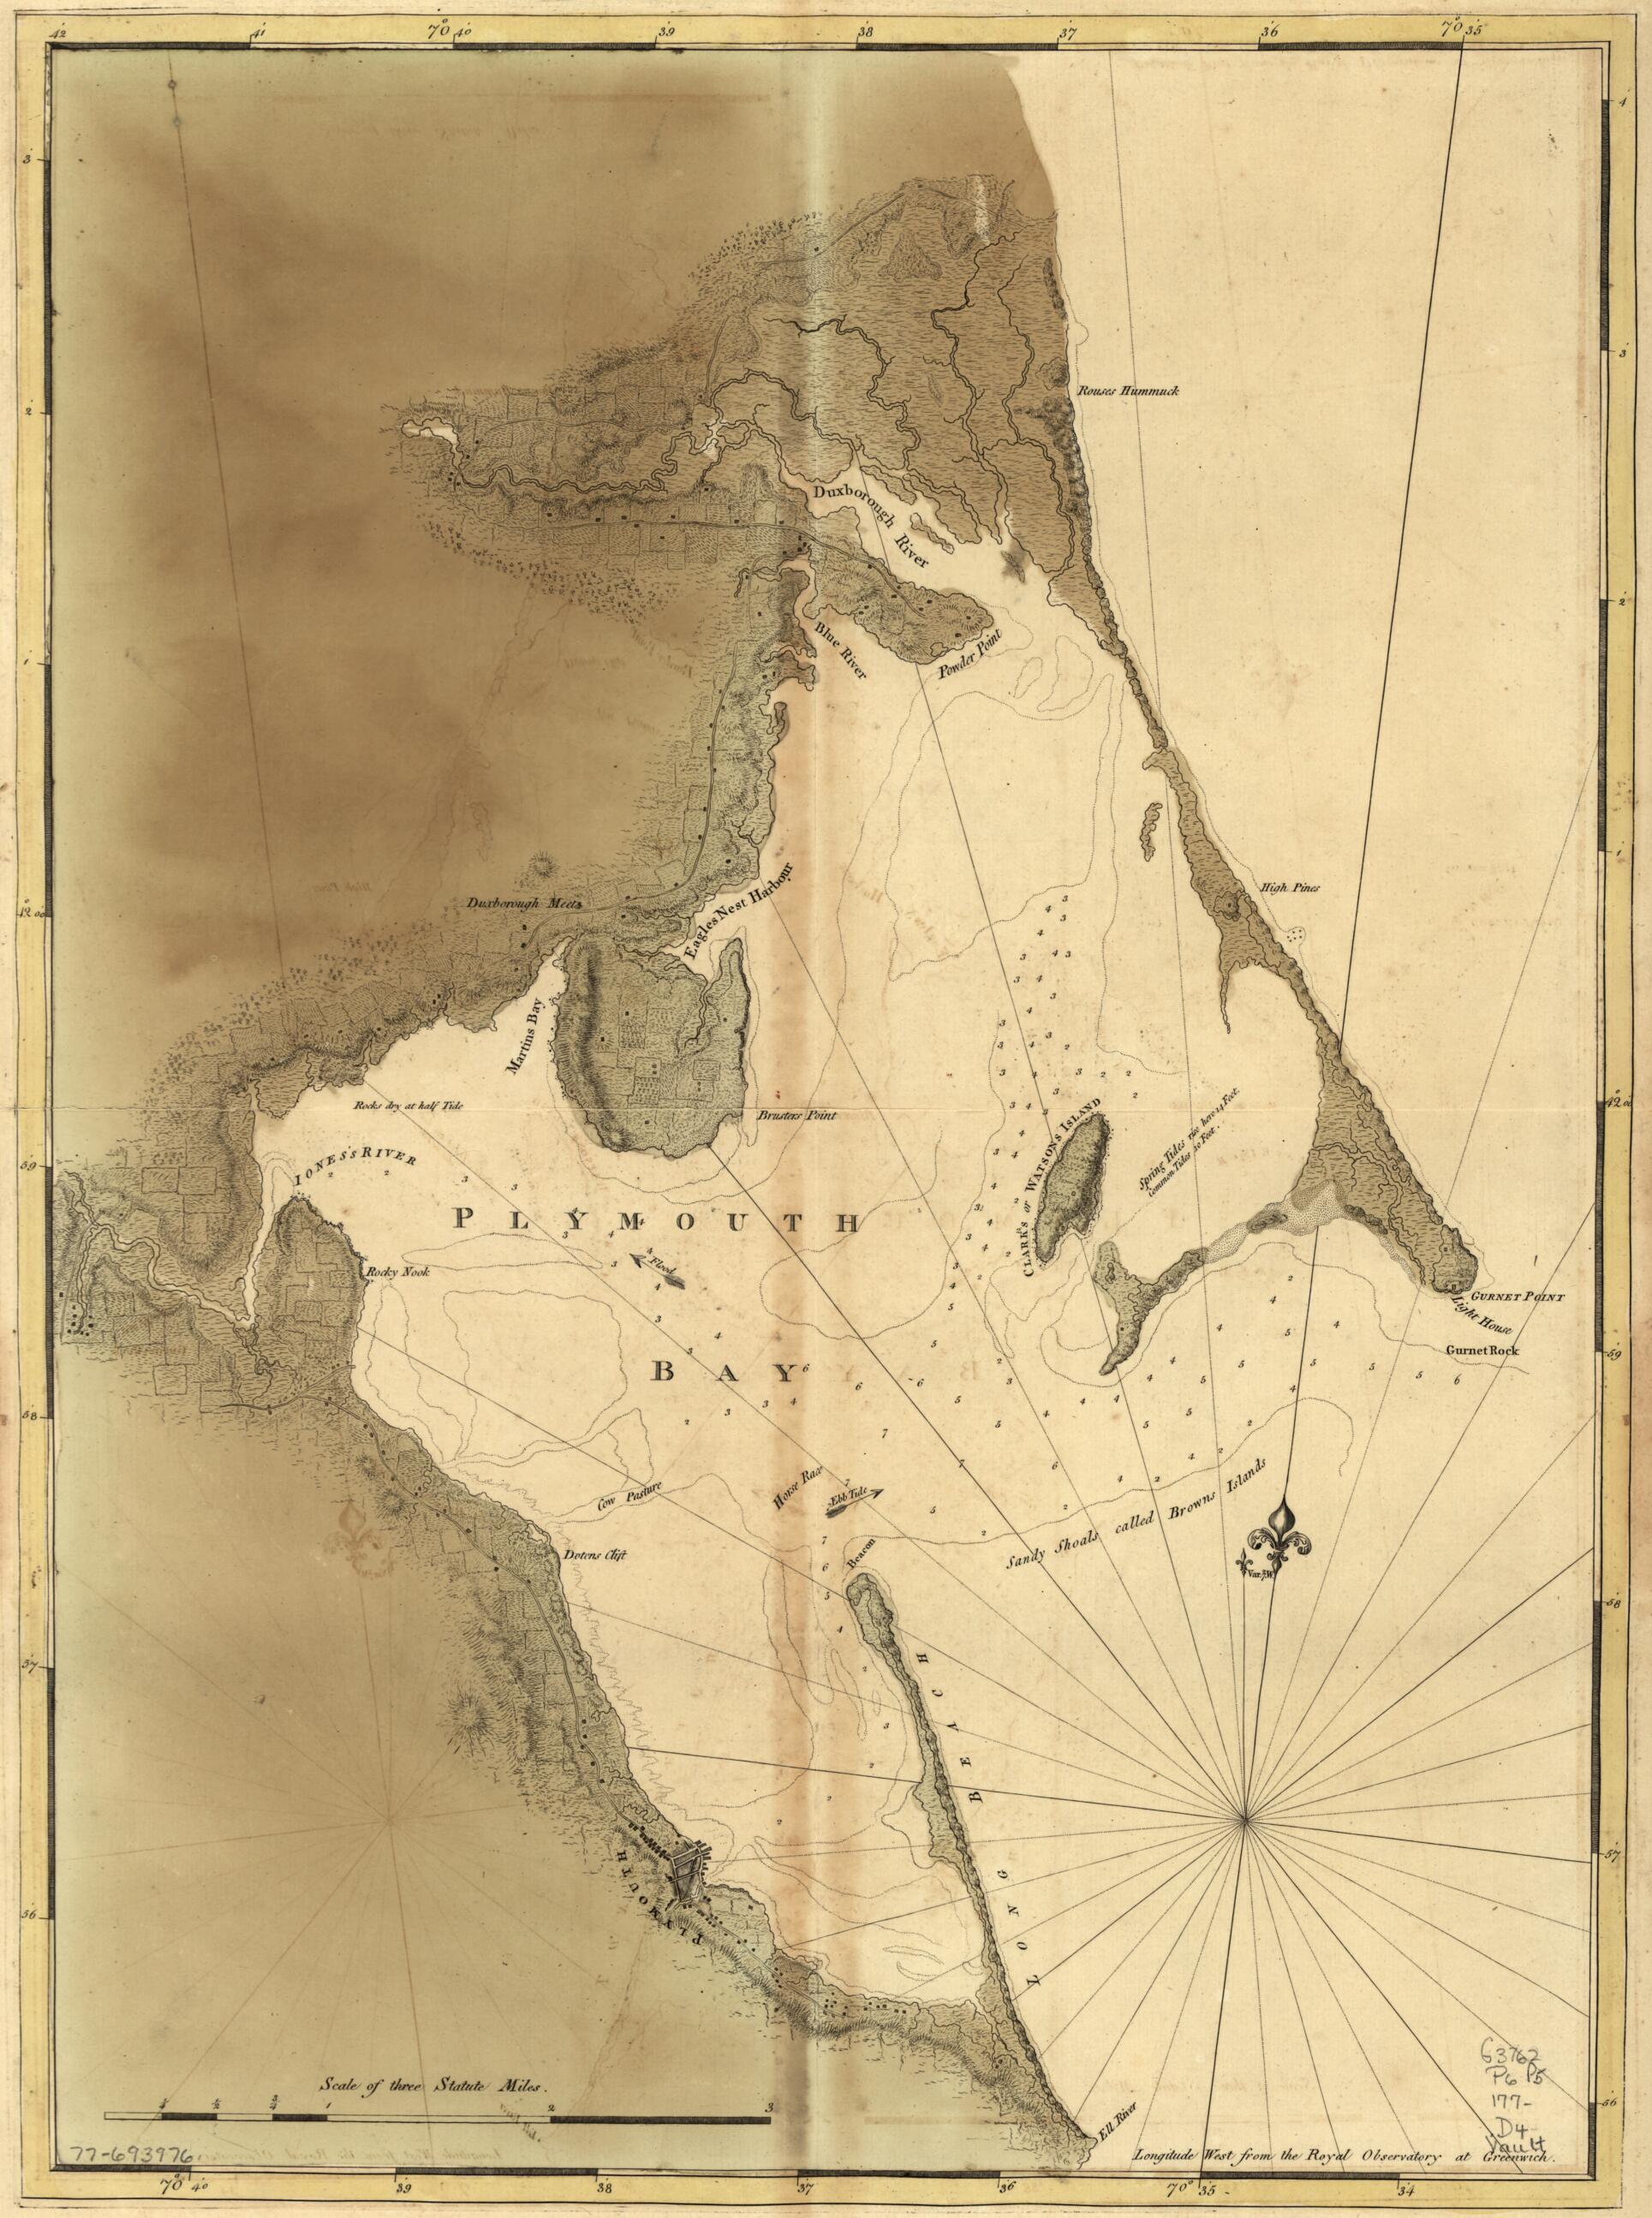 This old map of Chart of Plymouth Bay from 1770 was created by Joseph F. W. (Joseph Frederick Wallet) Des Barres in 1770